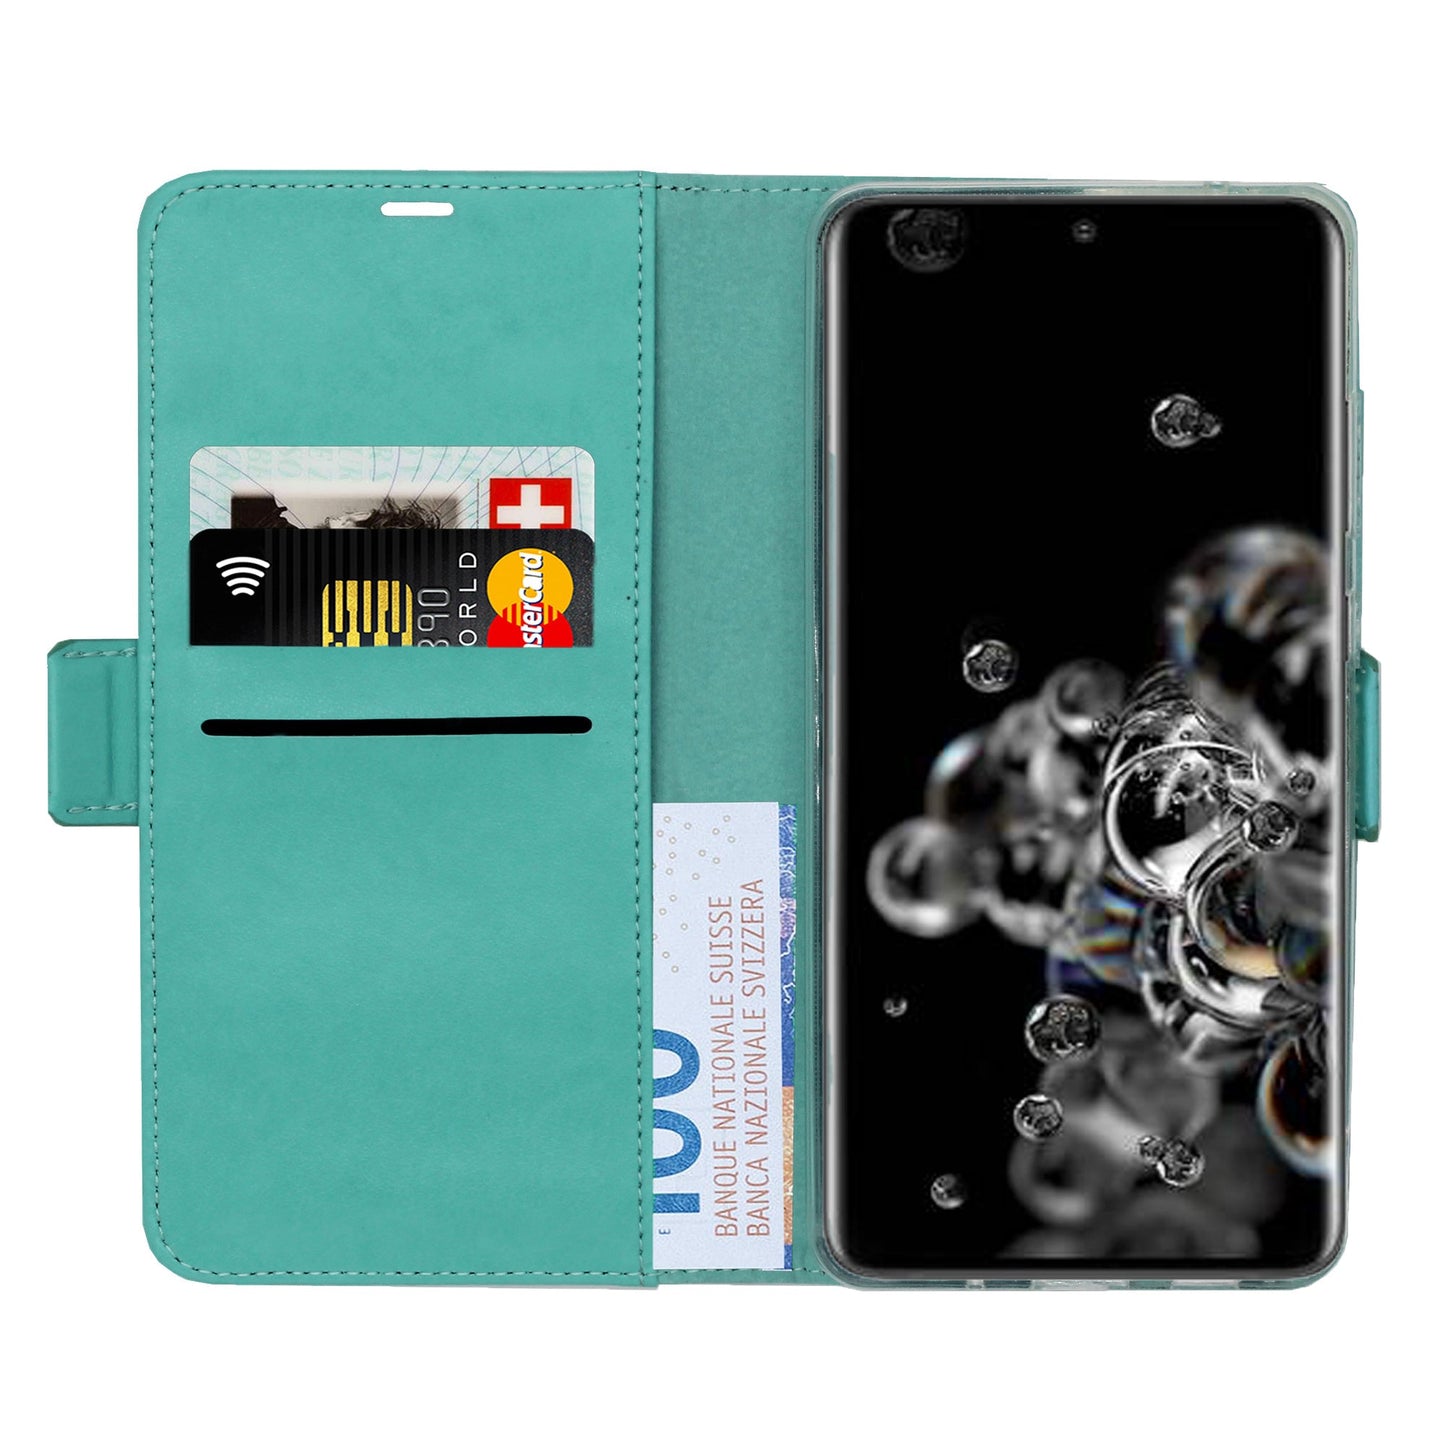 Uni Mint Victor Case for Samsung Galaxy S20 Ultra